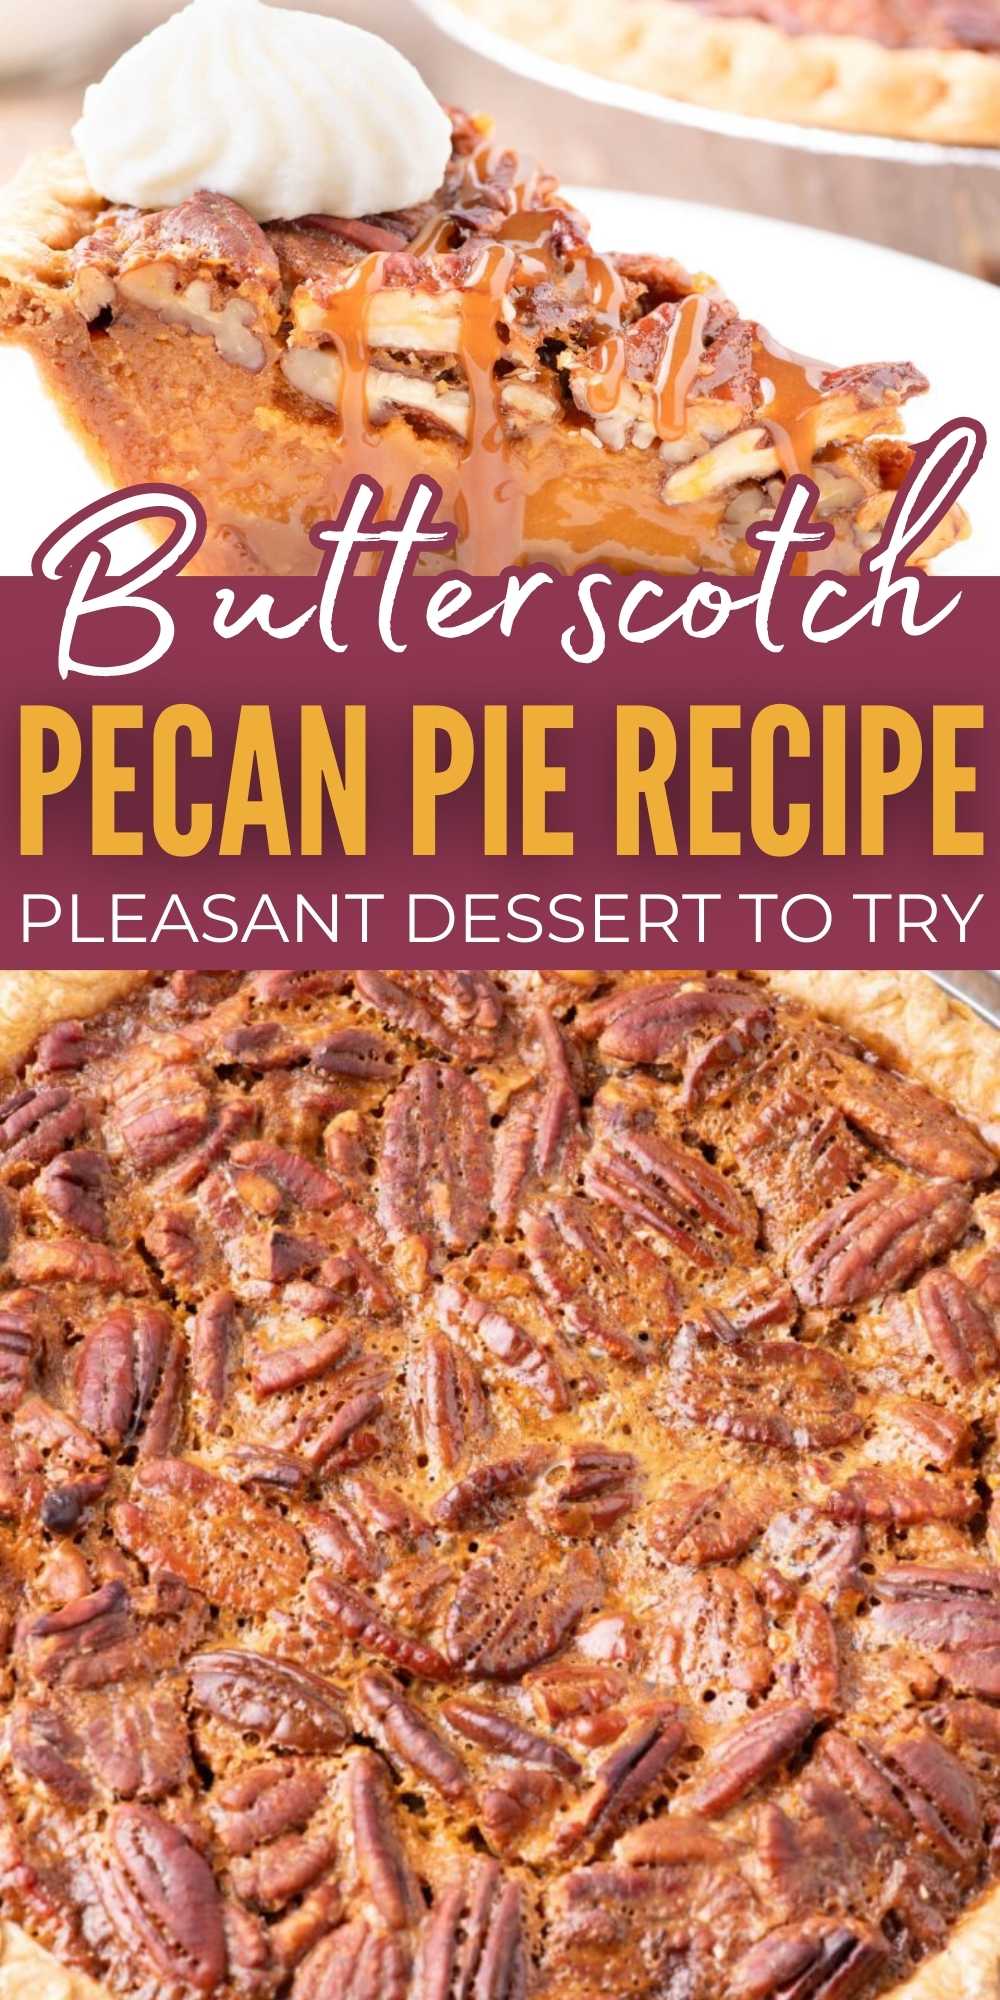 Butterscotch Pecan Pie is the perfect fall dessert. The pecan and butterscotch mixture fills a flaky pie crust for the ultimate pecan pie. The flavors of butterscotch and vanilla add so much warm flavors to the pie filling. It is the best pie recipe and it literally melts in your mouth. #eatingonadime #butterscotchpecanpie #pecanpie